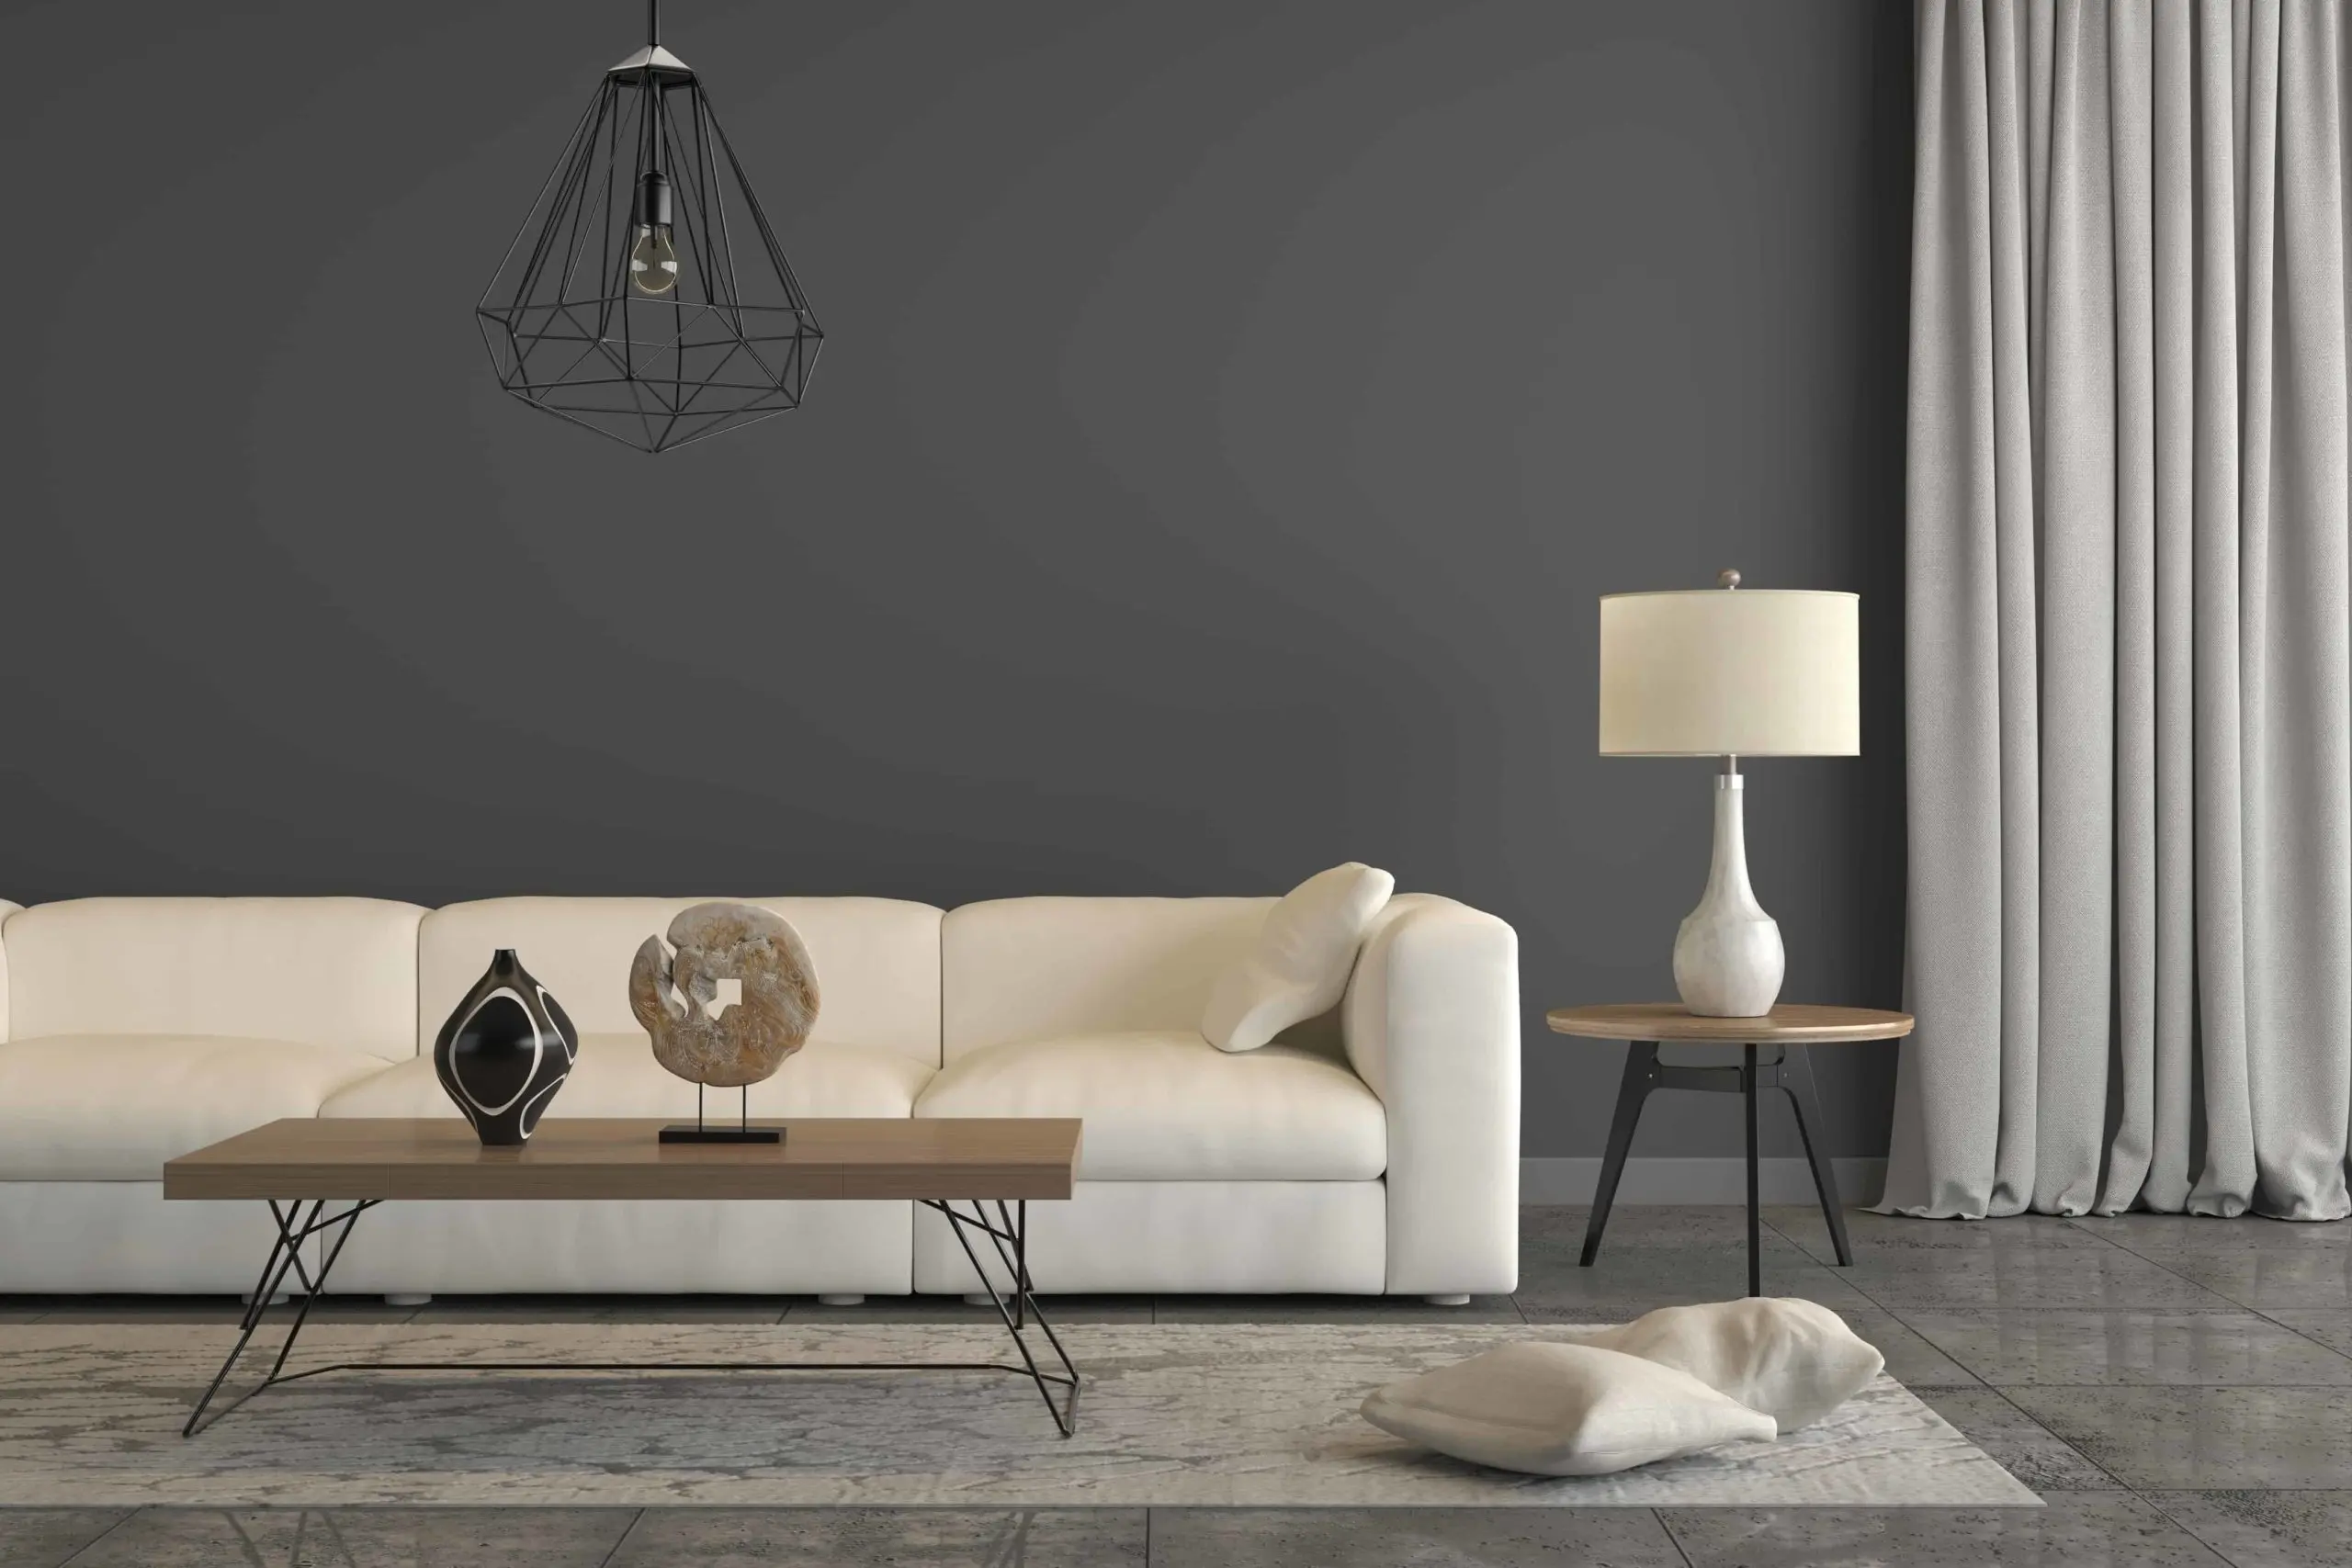 How to Pack Lampshades for Moving - Horizontal composition showing a detail of a minimalist sofa with living room setup around it. There is a table with decorative pieces, pillows, a carpet, a lampa and a curtain. Design is modern and minimalist. Gray wall behind makes it feel intimate. 3D render- United Van Lines